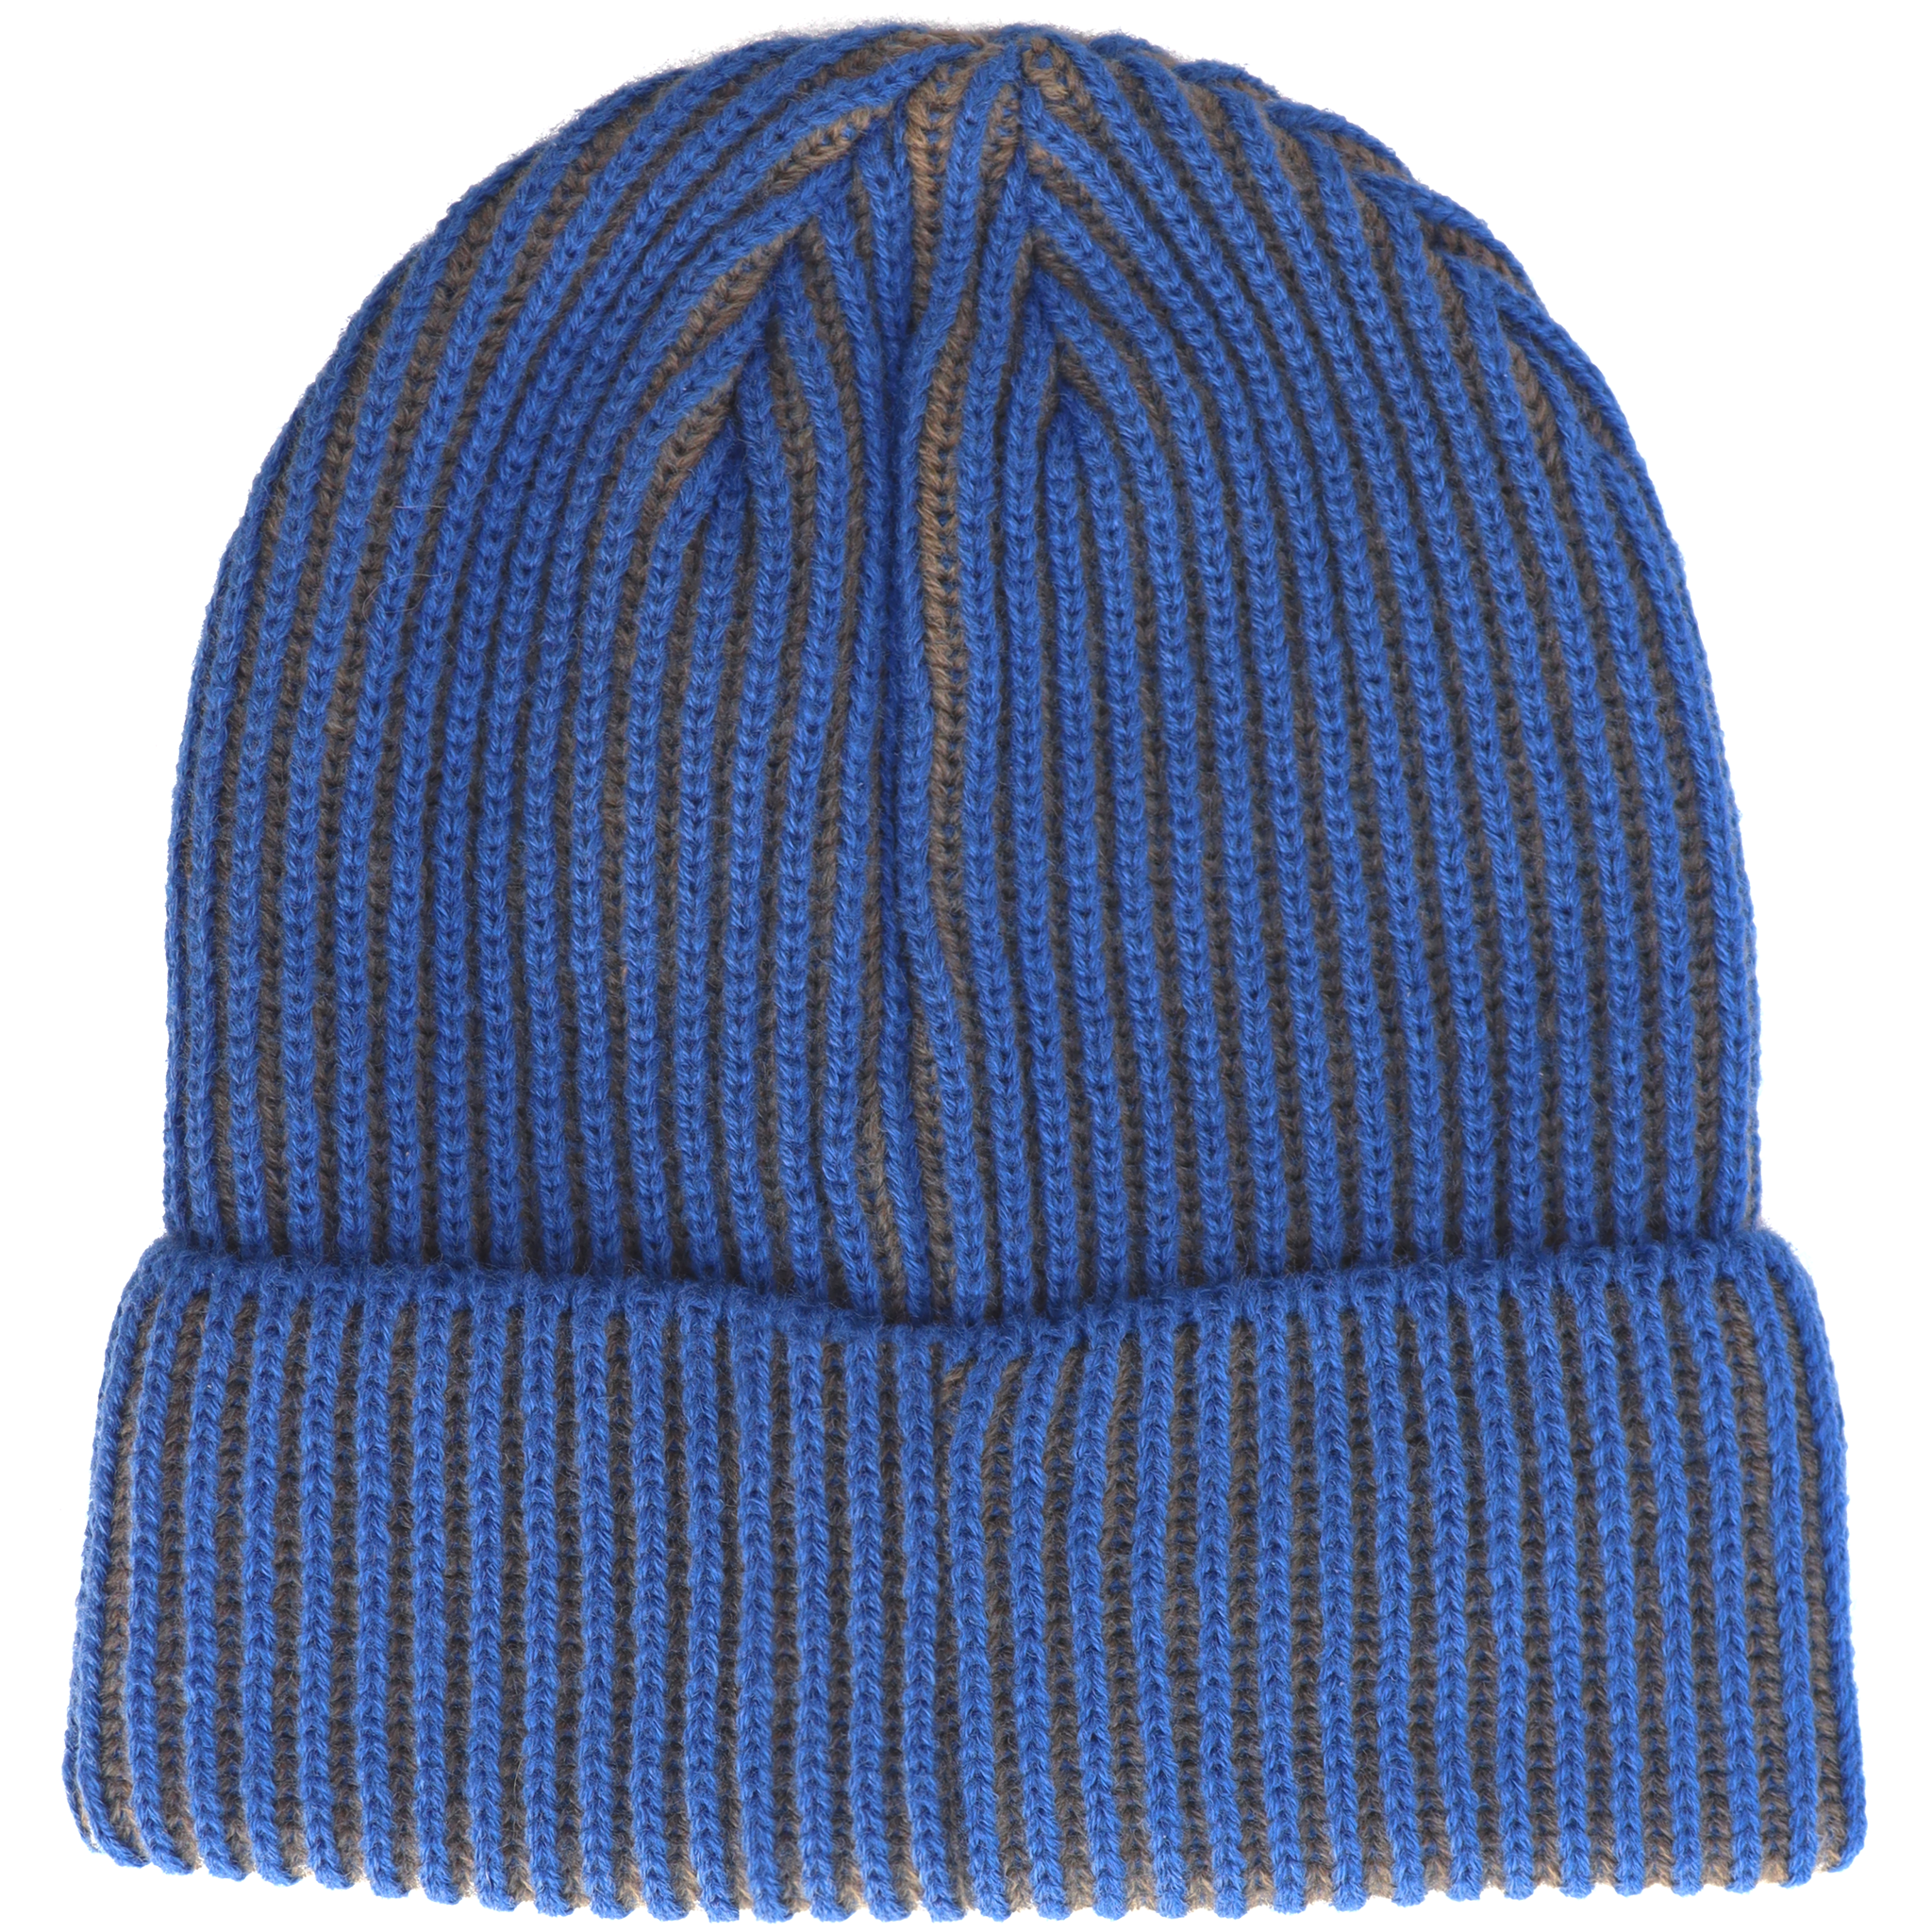 Rubber Two-Toned – Patch hii-def Beanie